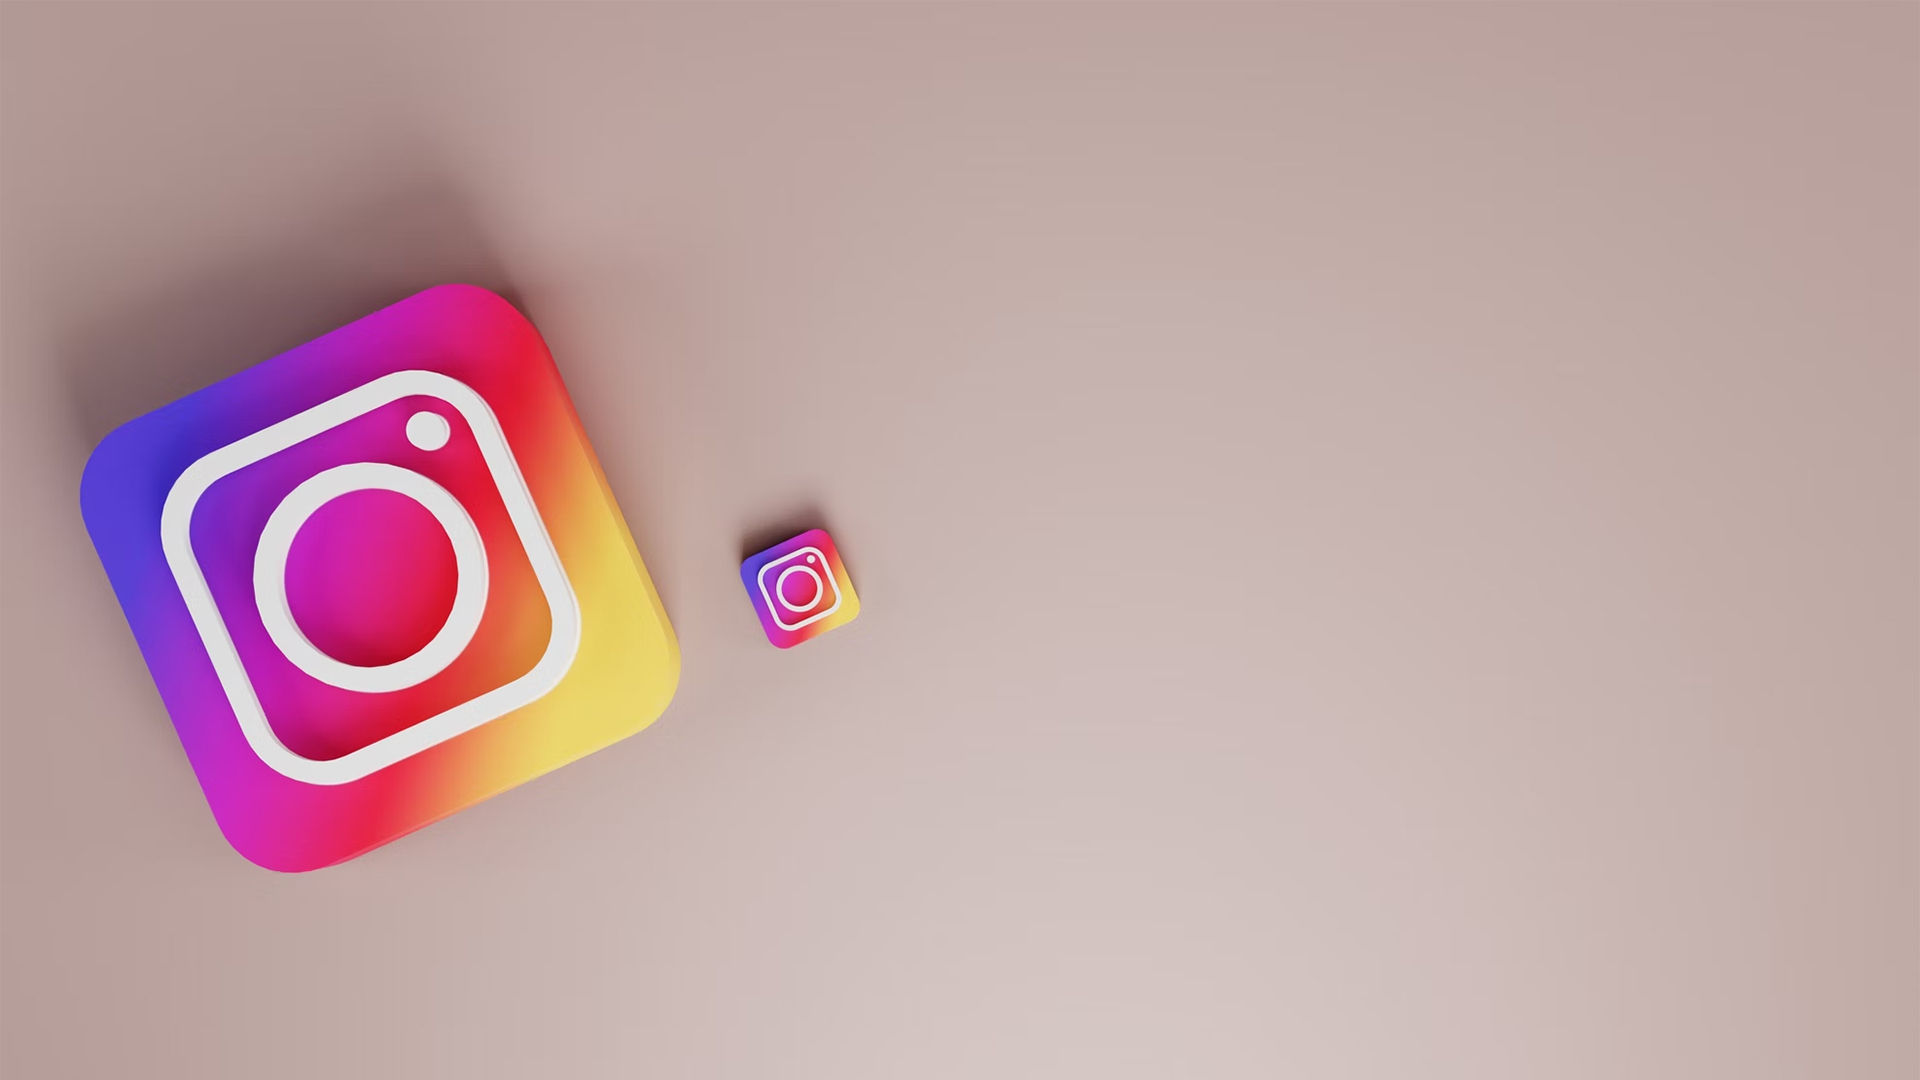 How to Pin a Comment on Instagram